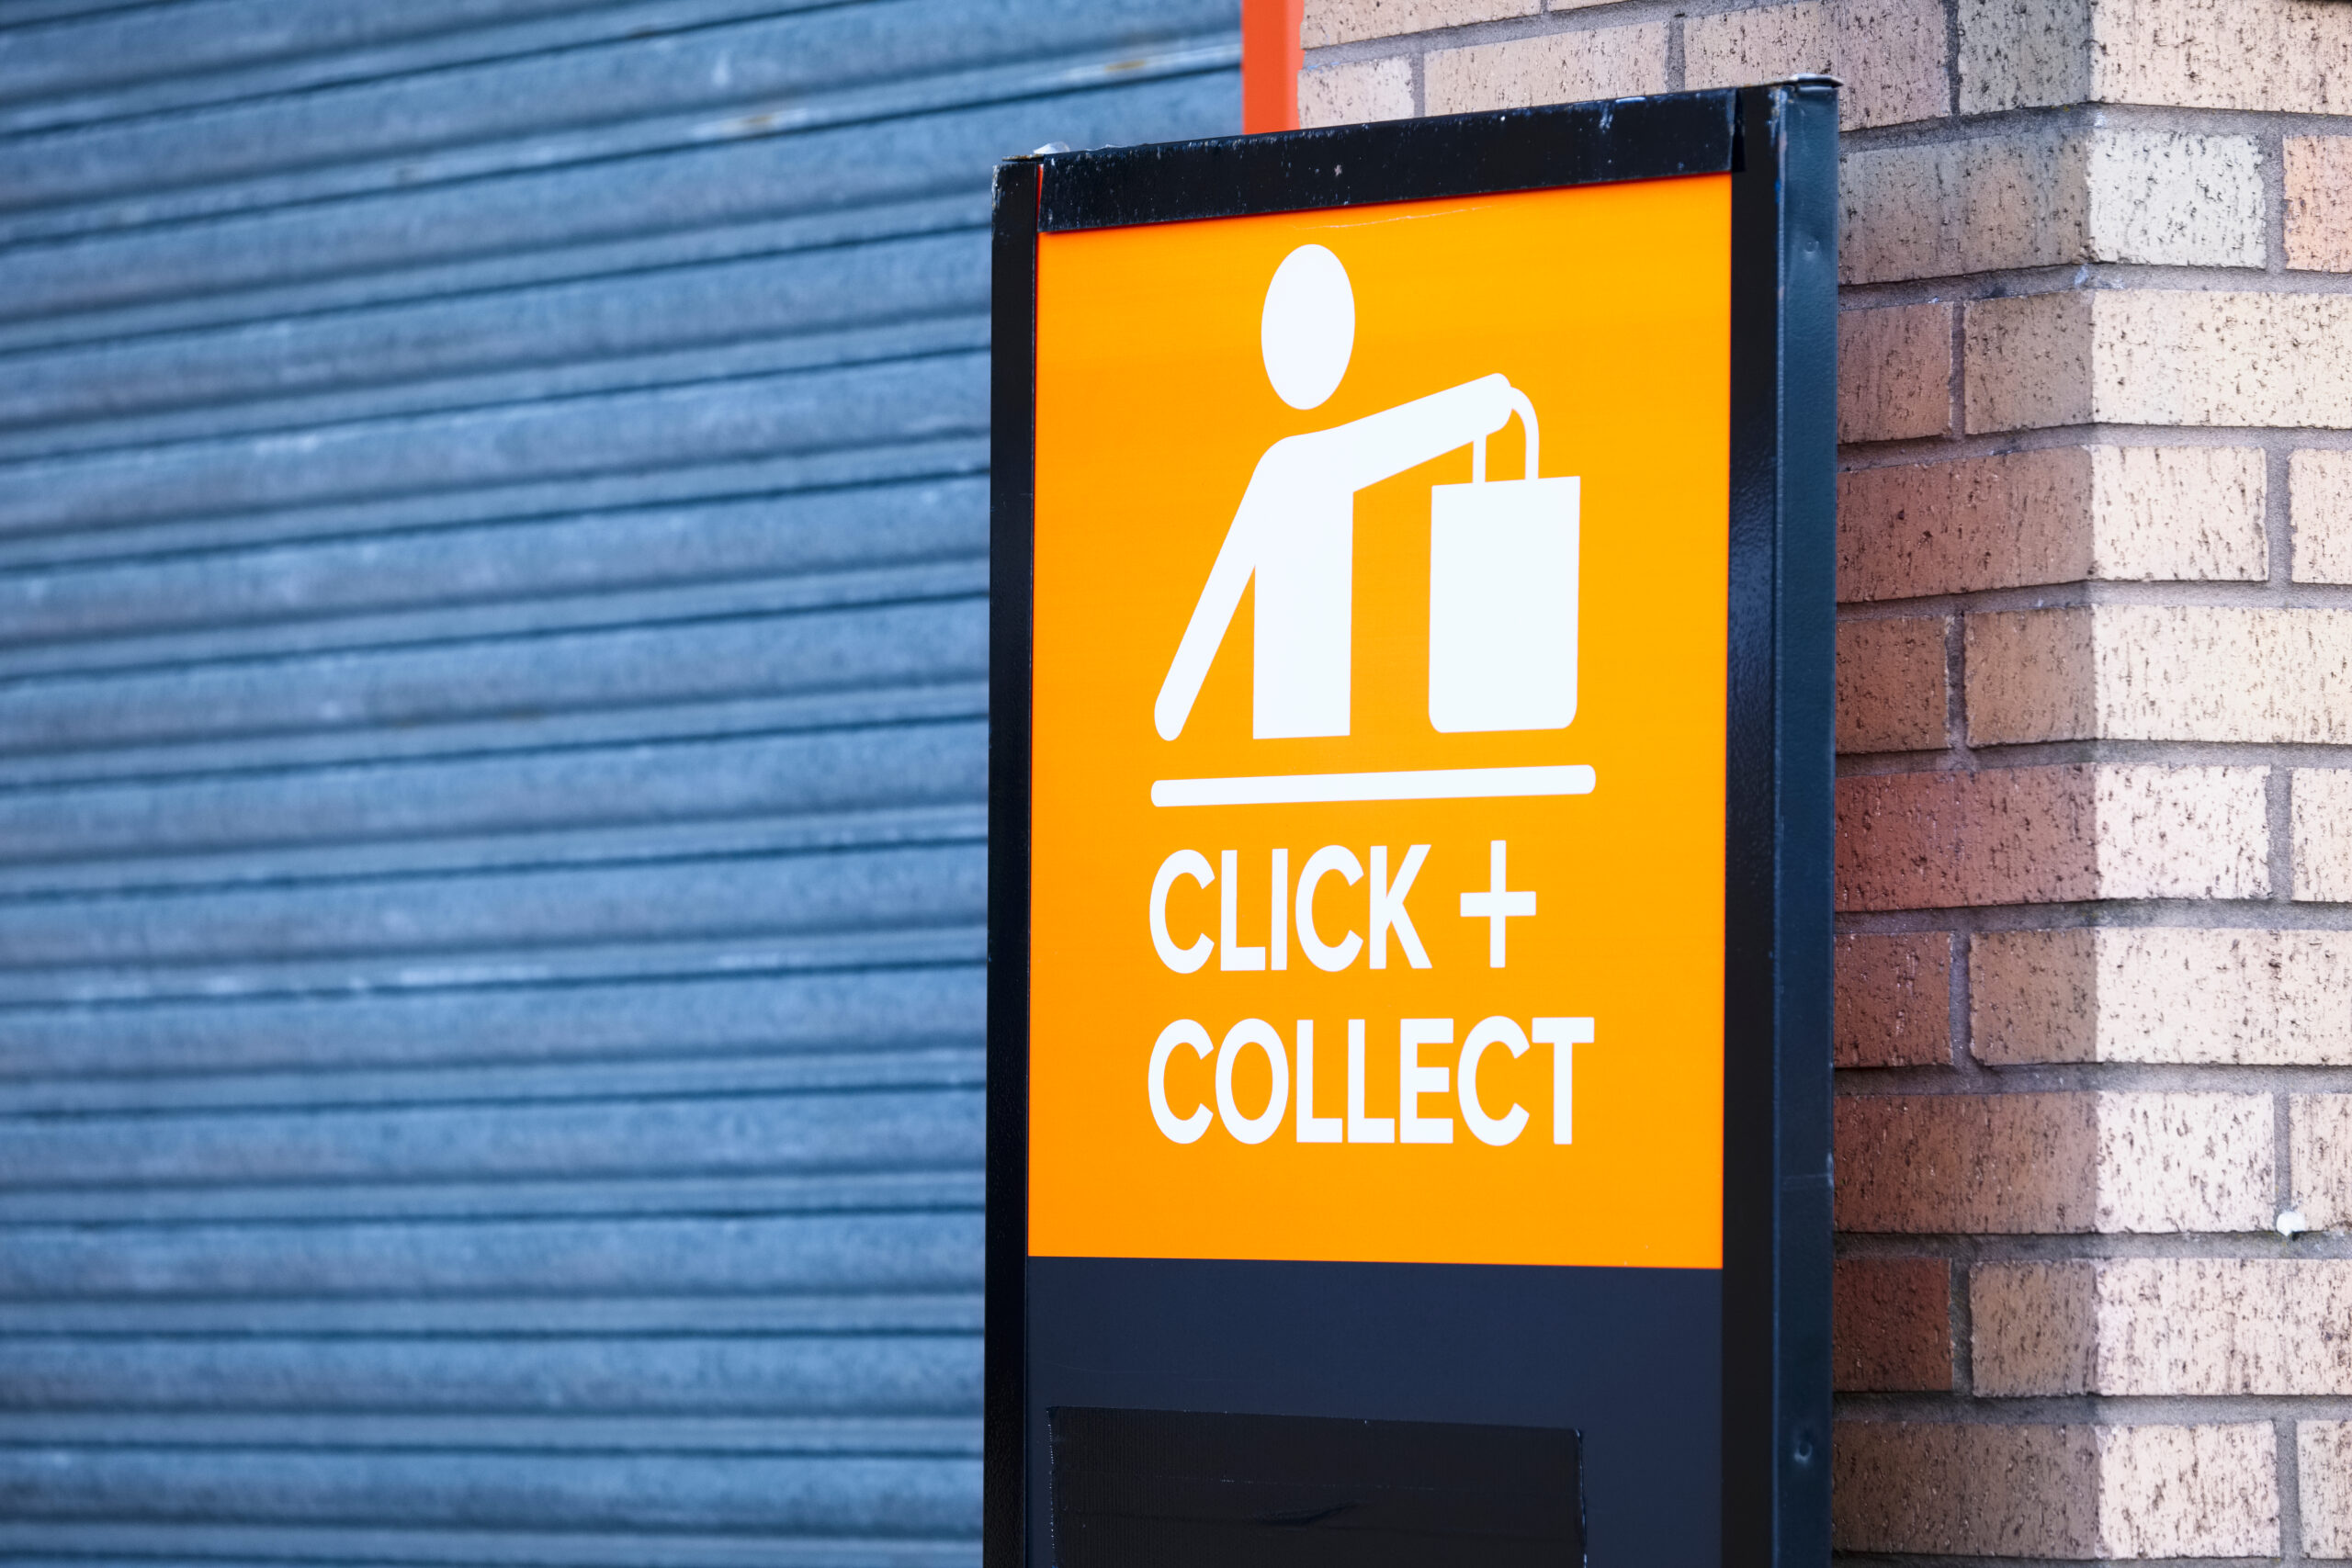 Delivery disruption driving click and collect surge, as retail bosses urge people to stick to shops